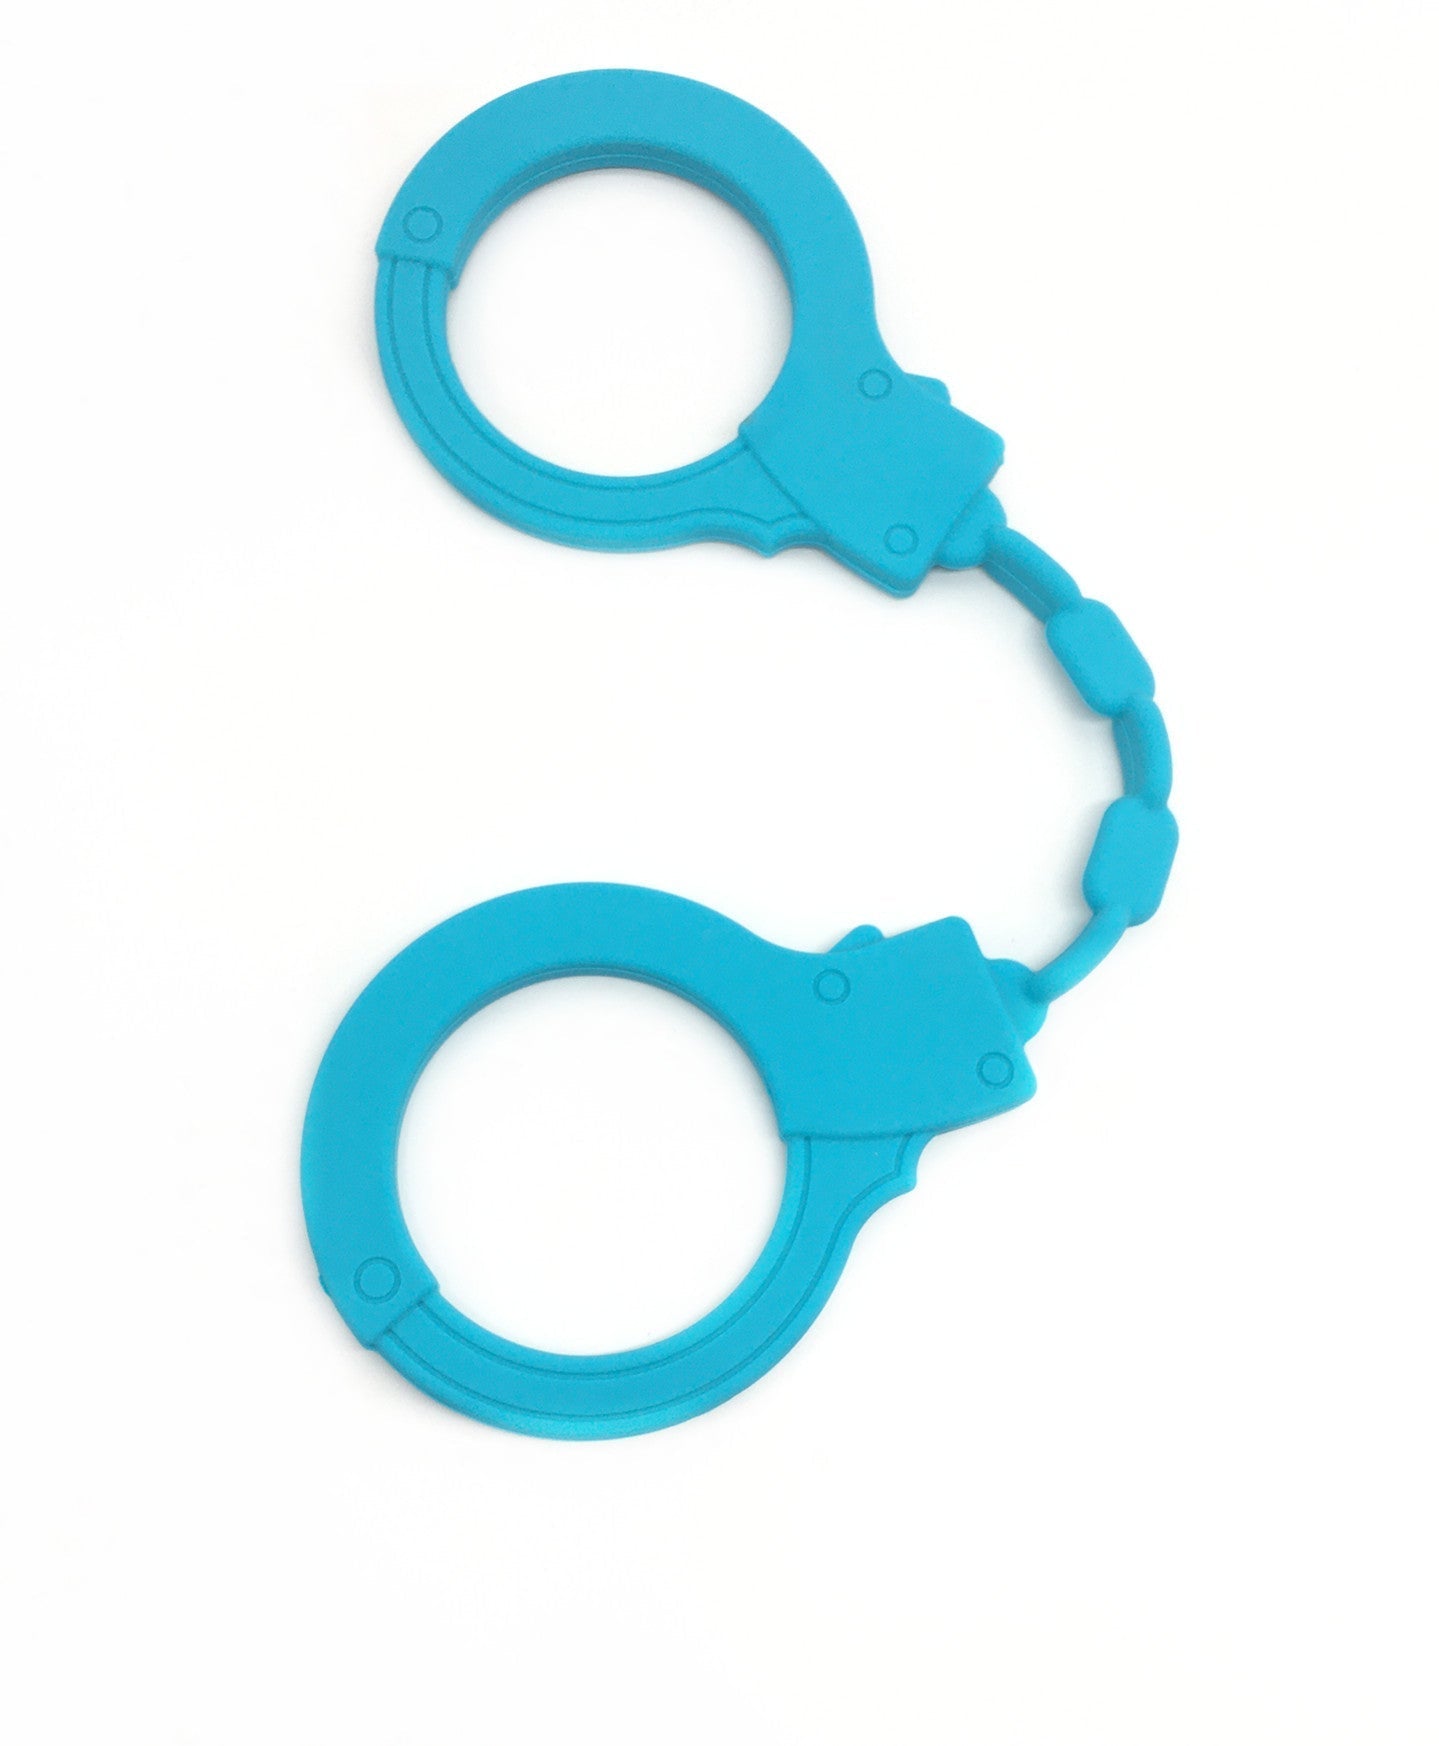 Silicone Restraint Cuffs: Safe, Comfortable, and Stylish Bestgspot